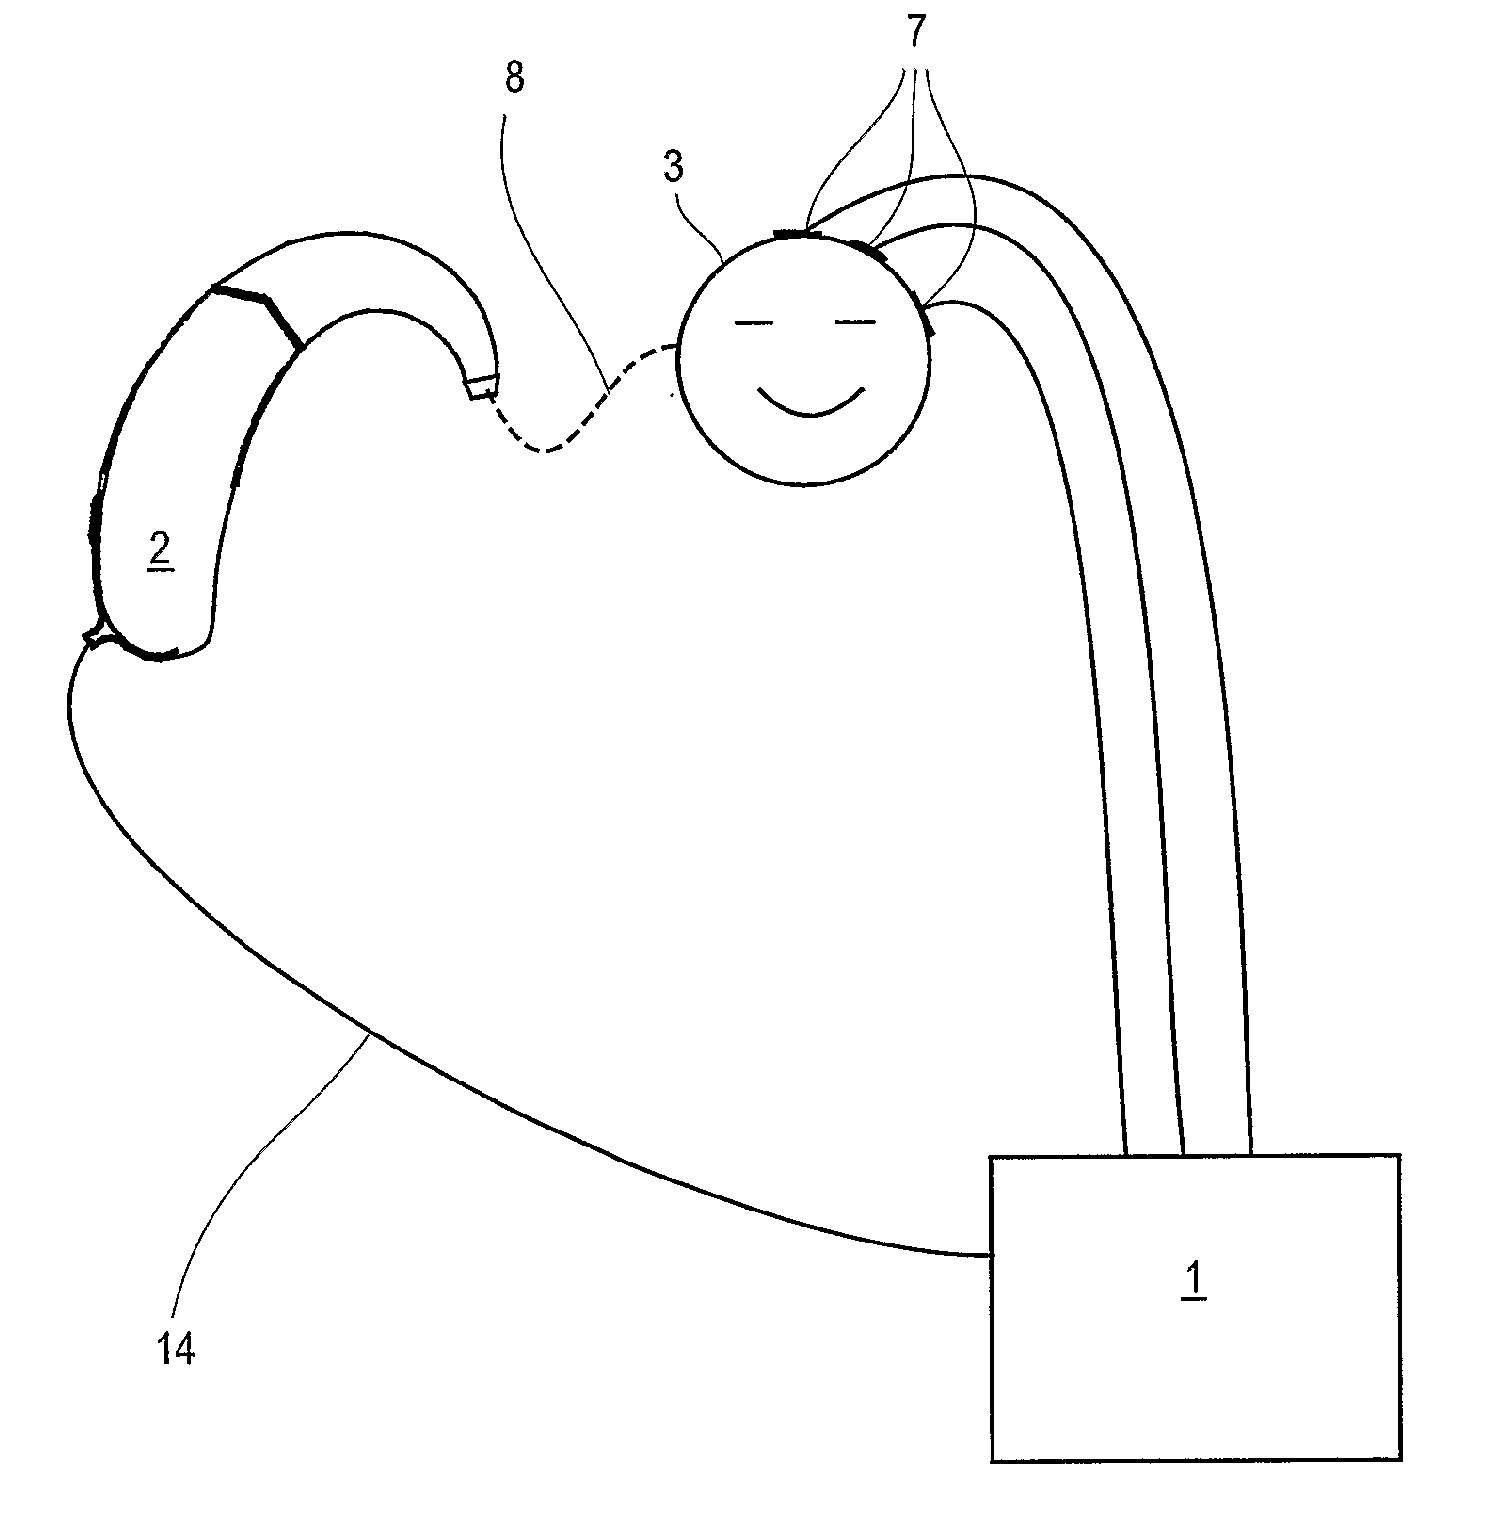 System and method for the objective measurement of hearing ability of an individual